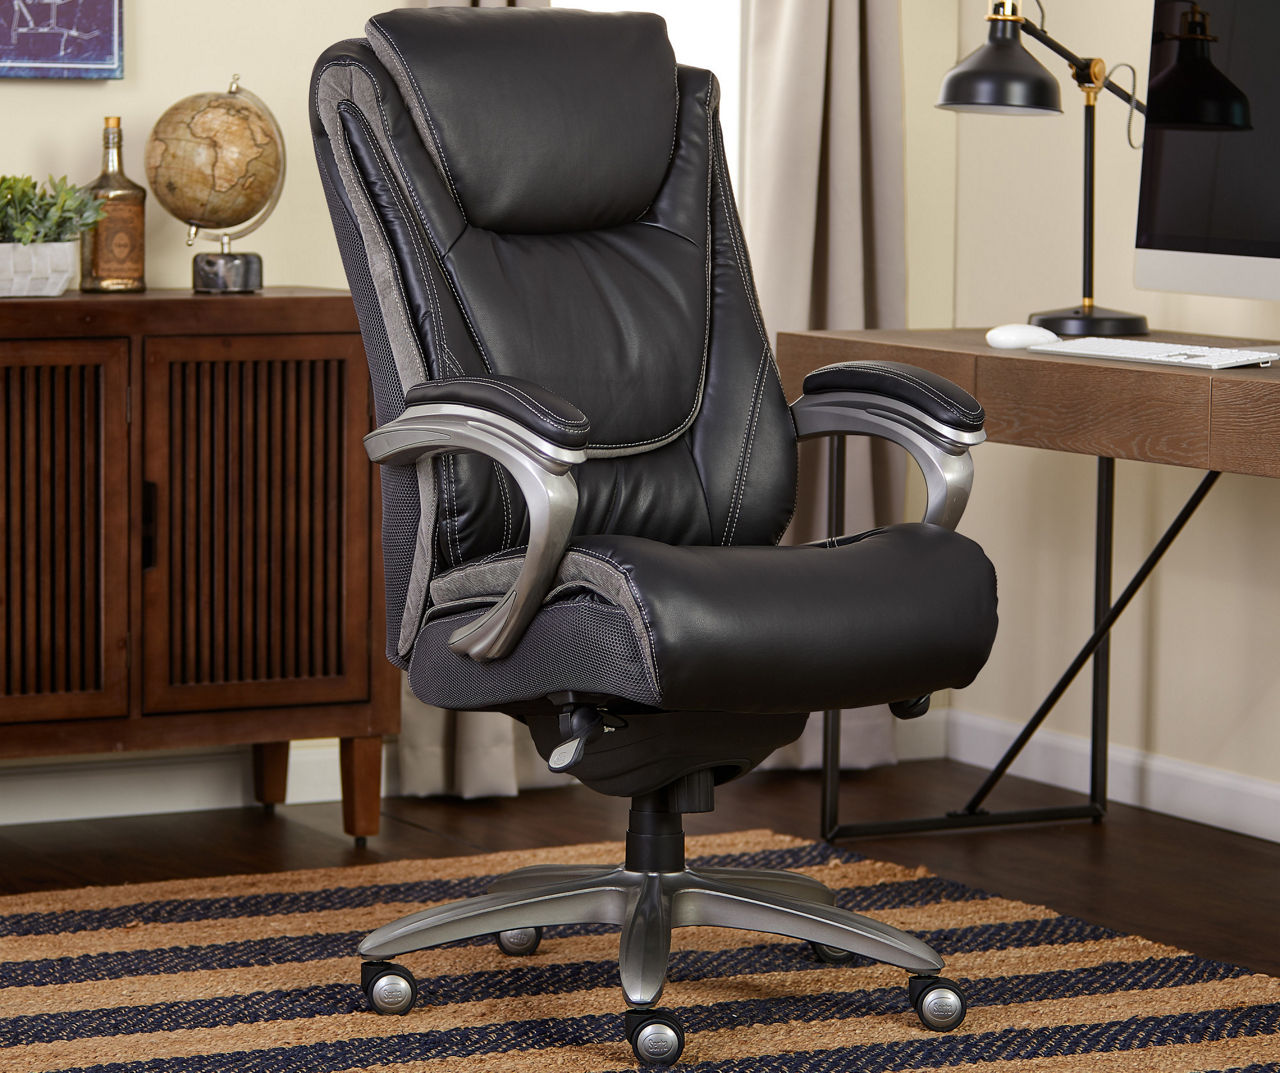 Serta Big & Tall Bonded Leather Commercial Office Chair with Memory Foam, Black